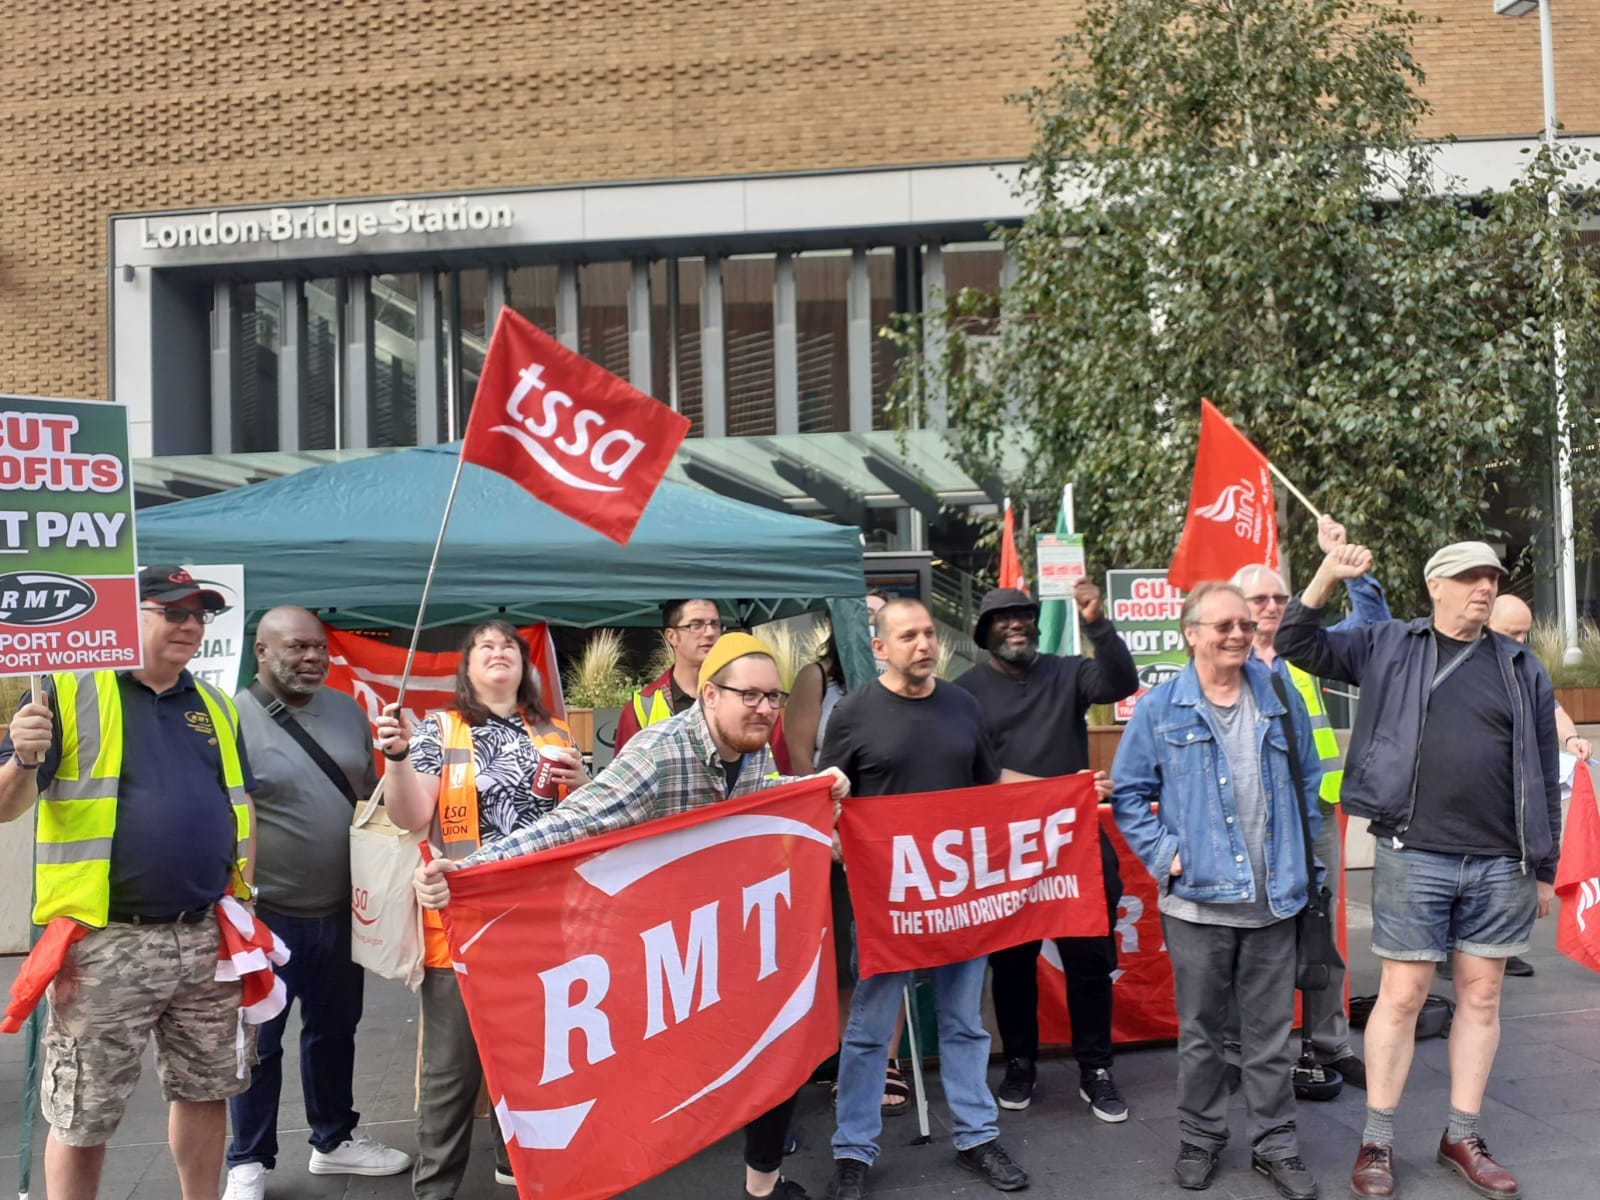 Picket Line with ten men and women holding flags from TSSA, RMT and ASLEF unions